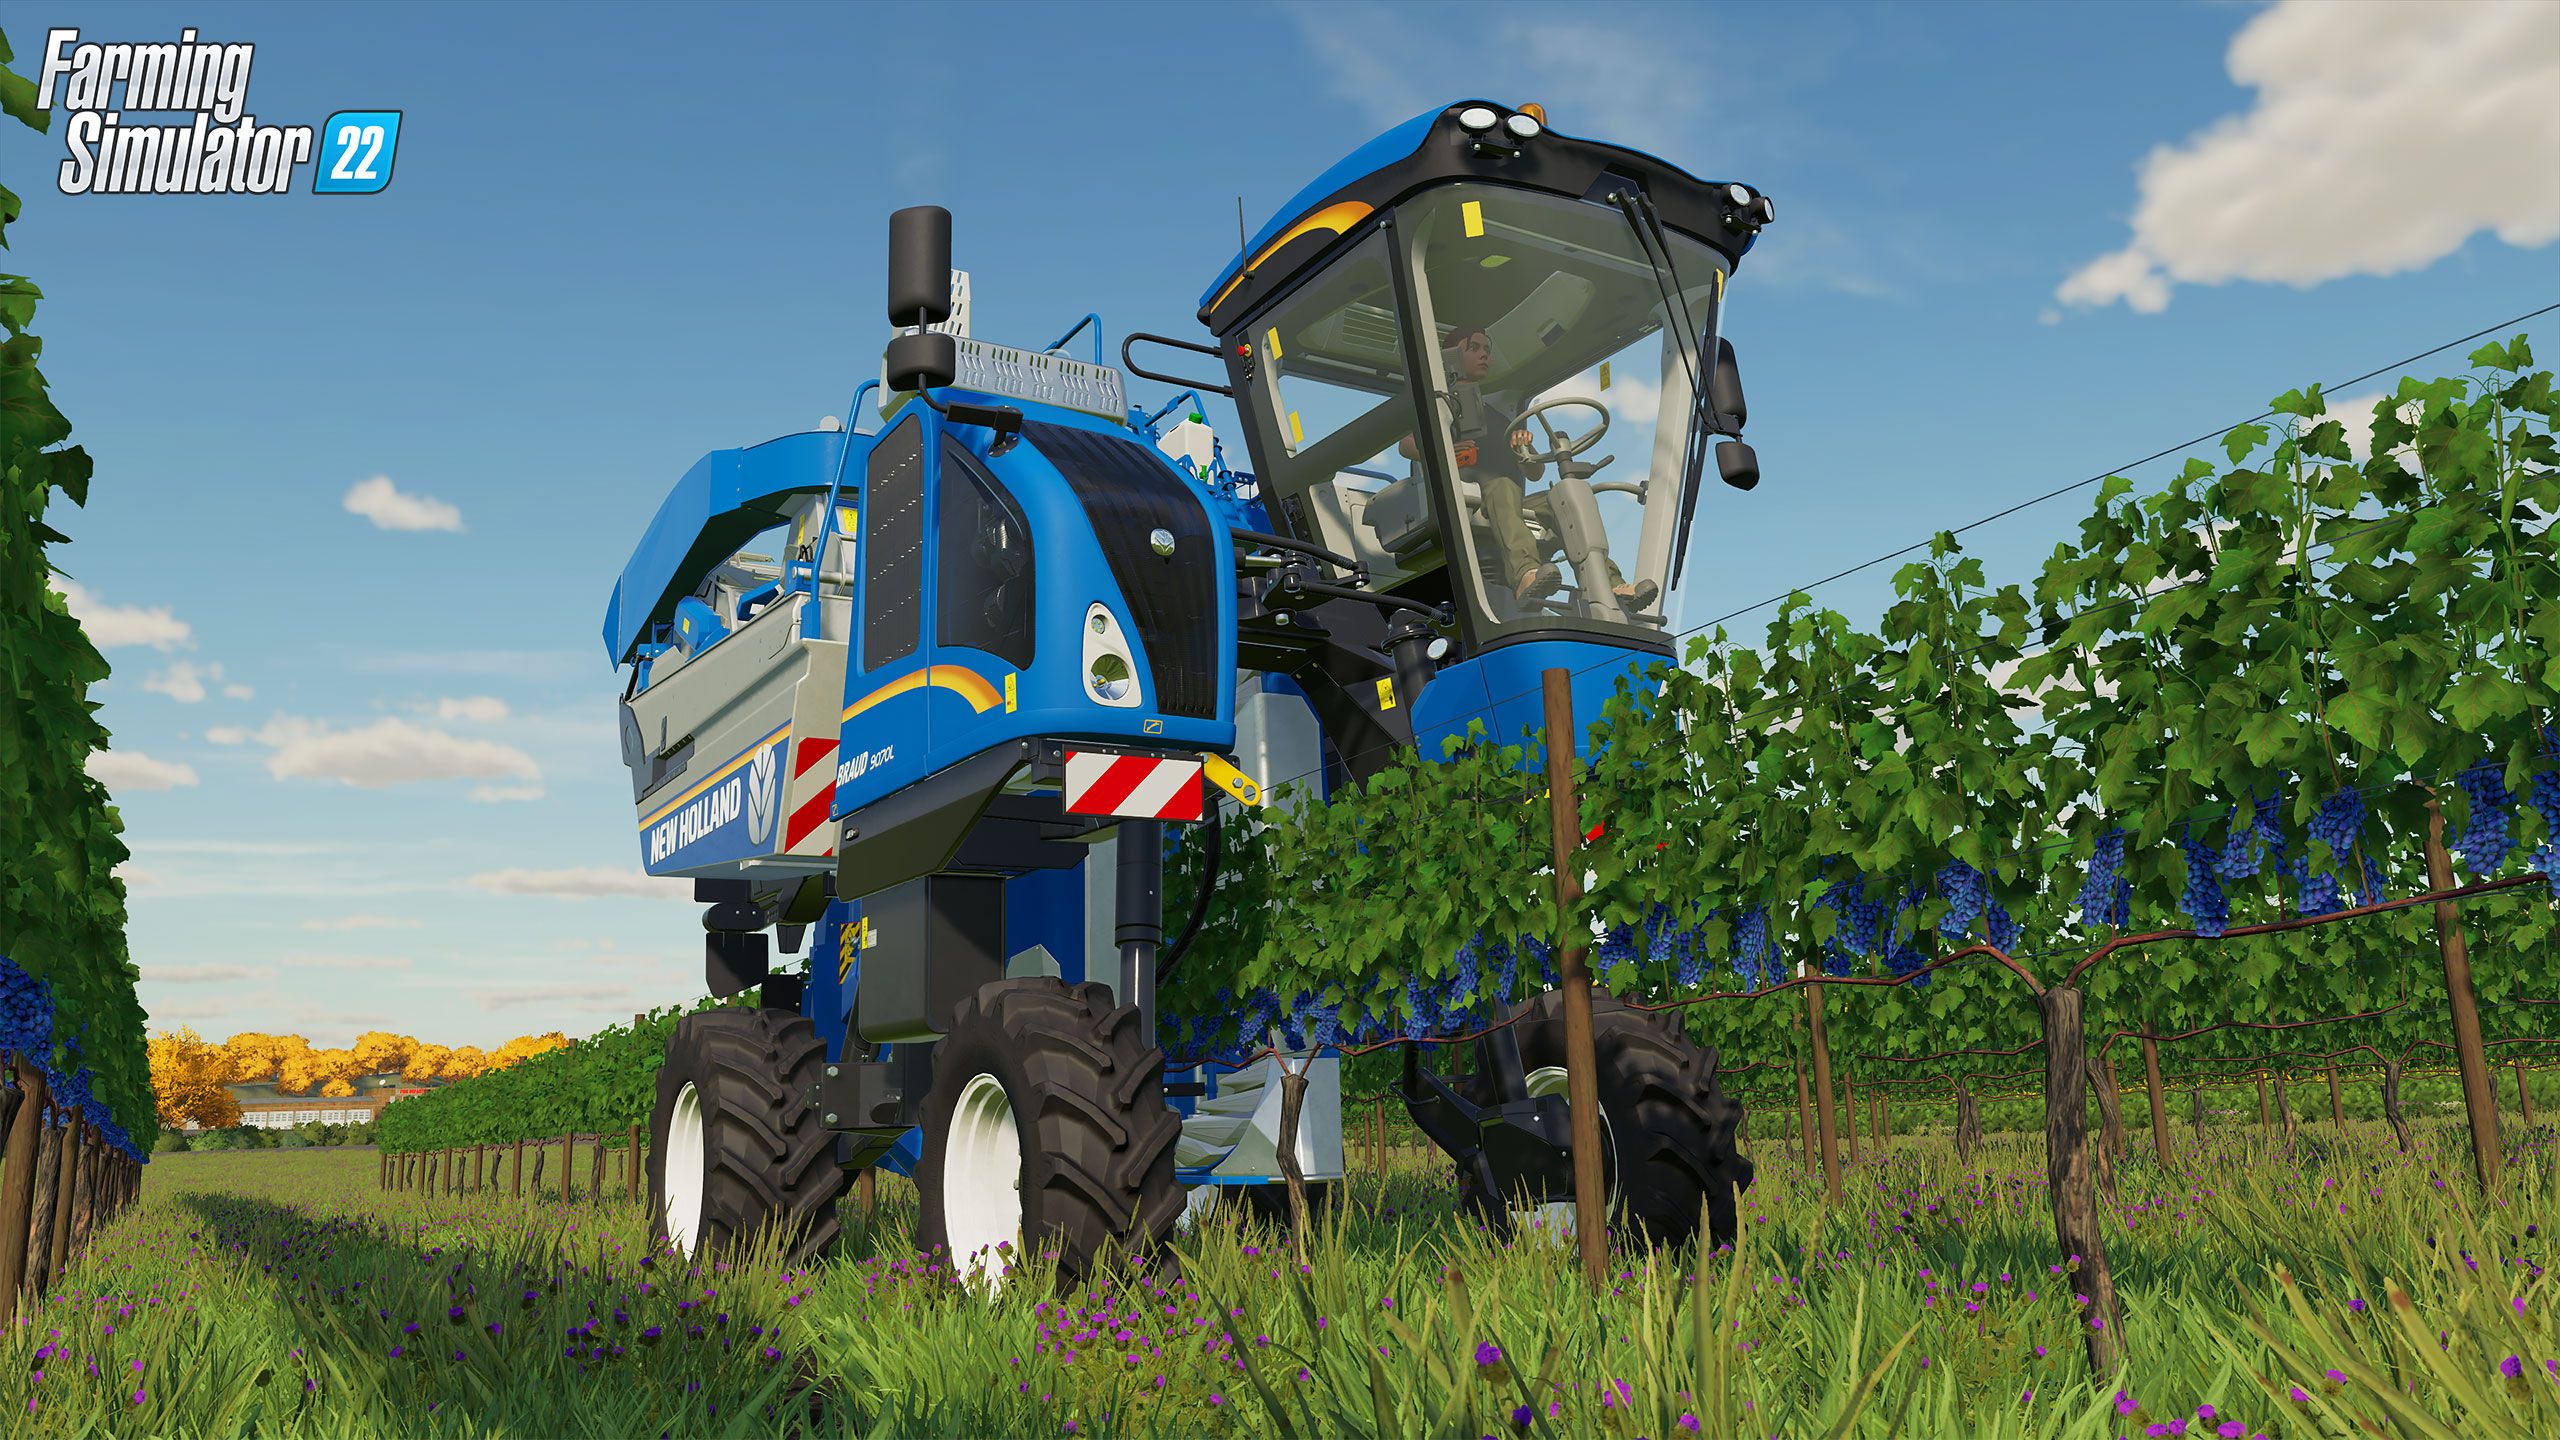 download farming simulator 22 ps4 for free